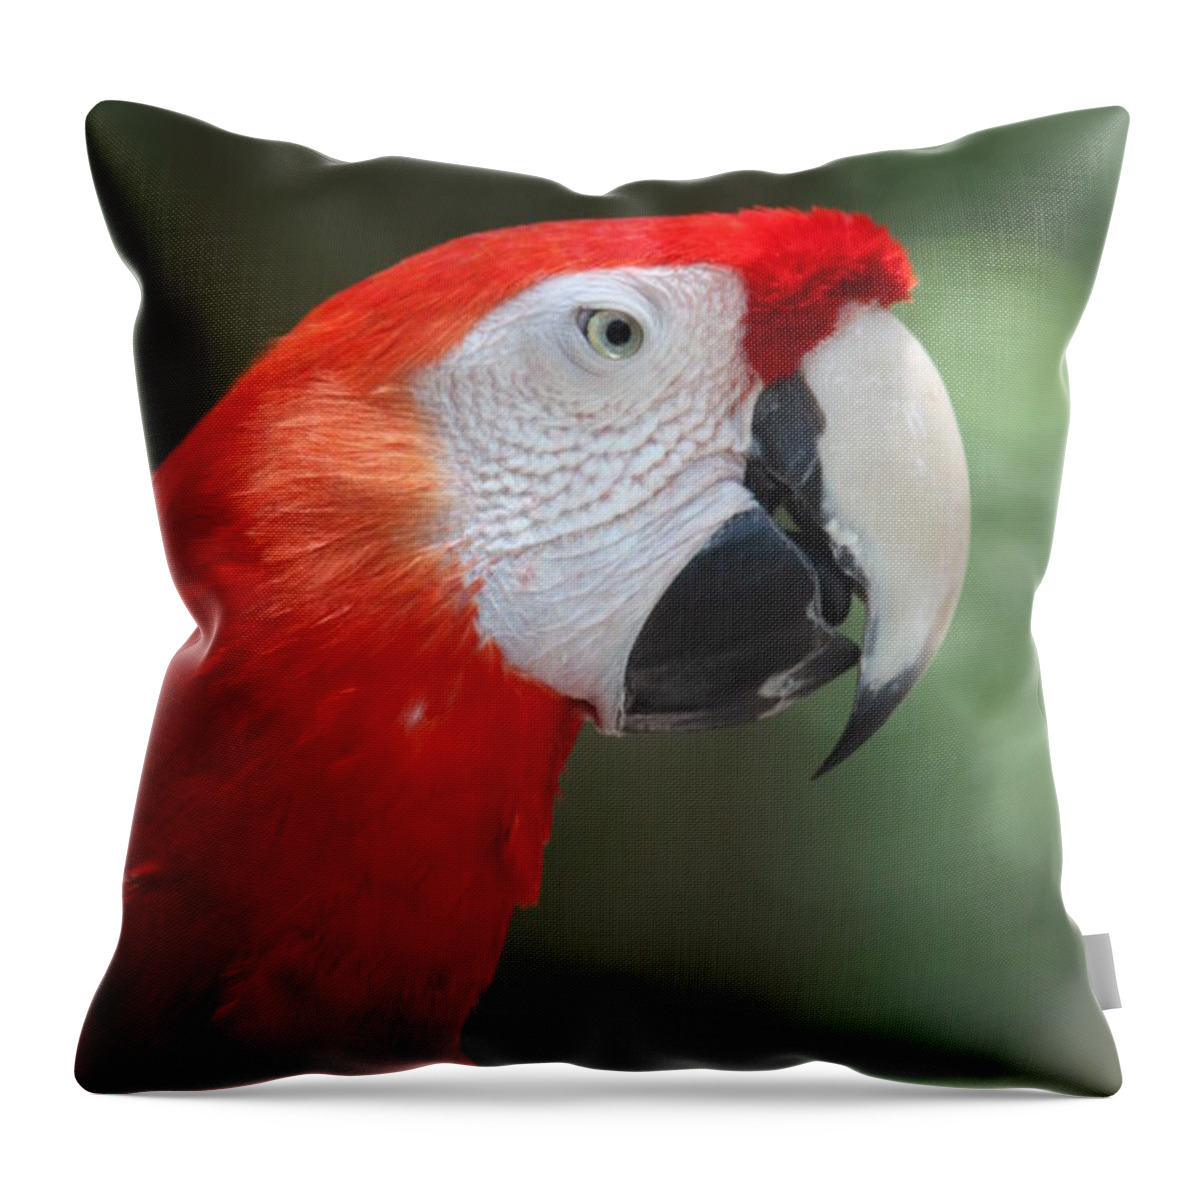 Polly Throw Pillow featuring the photograph Polly by Patrick Witz